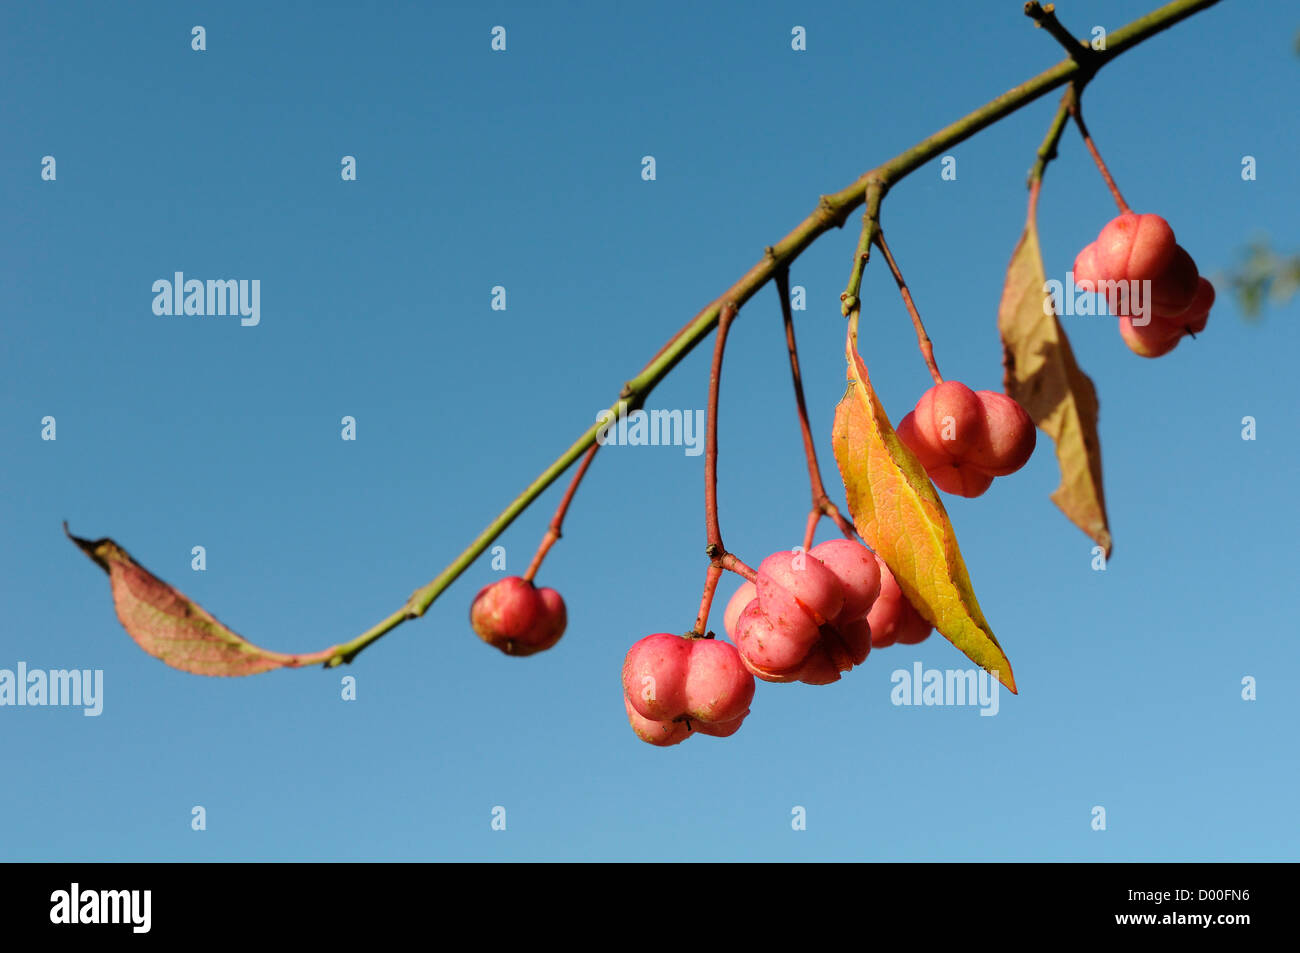 Spindle tree berries (Euonymus europaeus) with orange seeds visible within splitting capsular fruits, Wiltshire, UK, September. Stock Photo